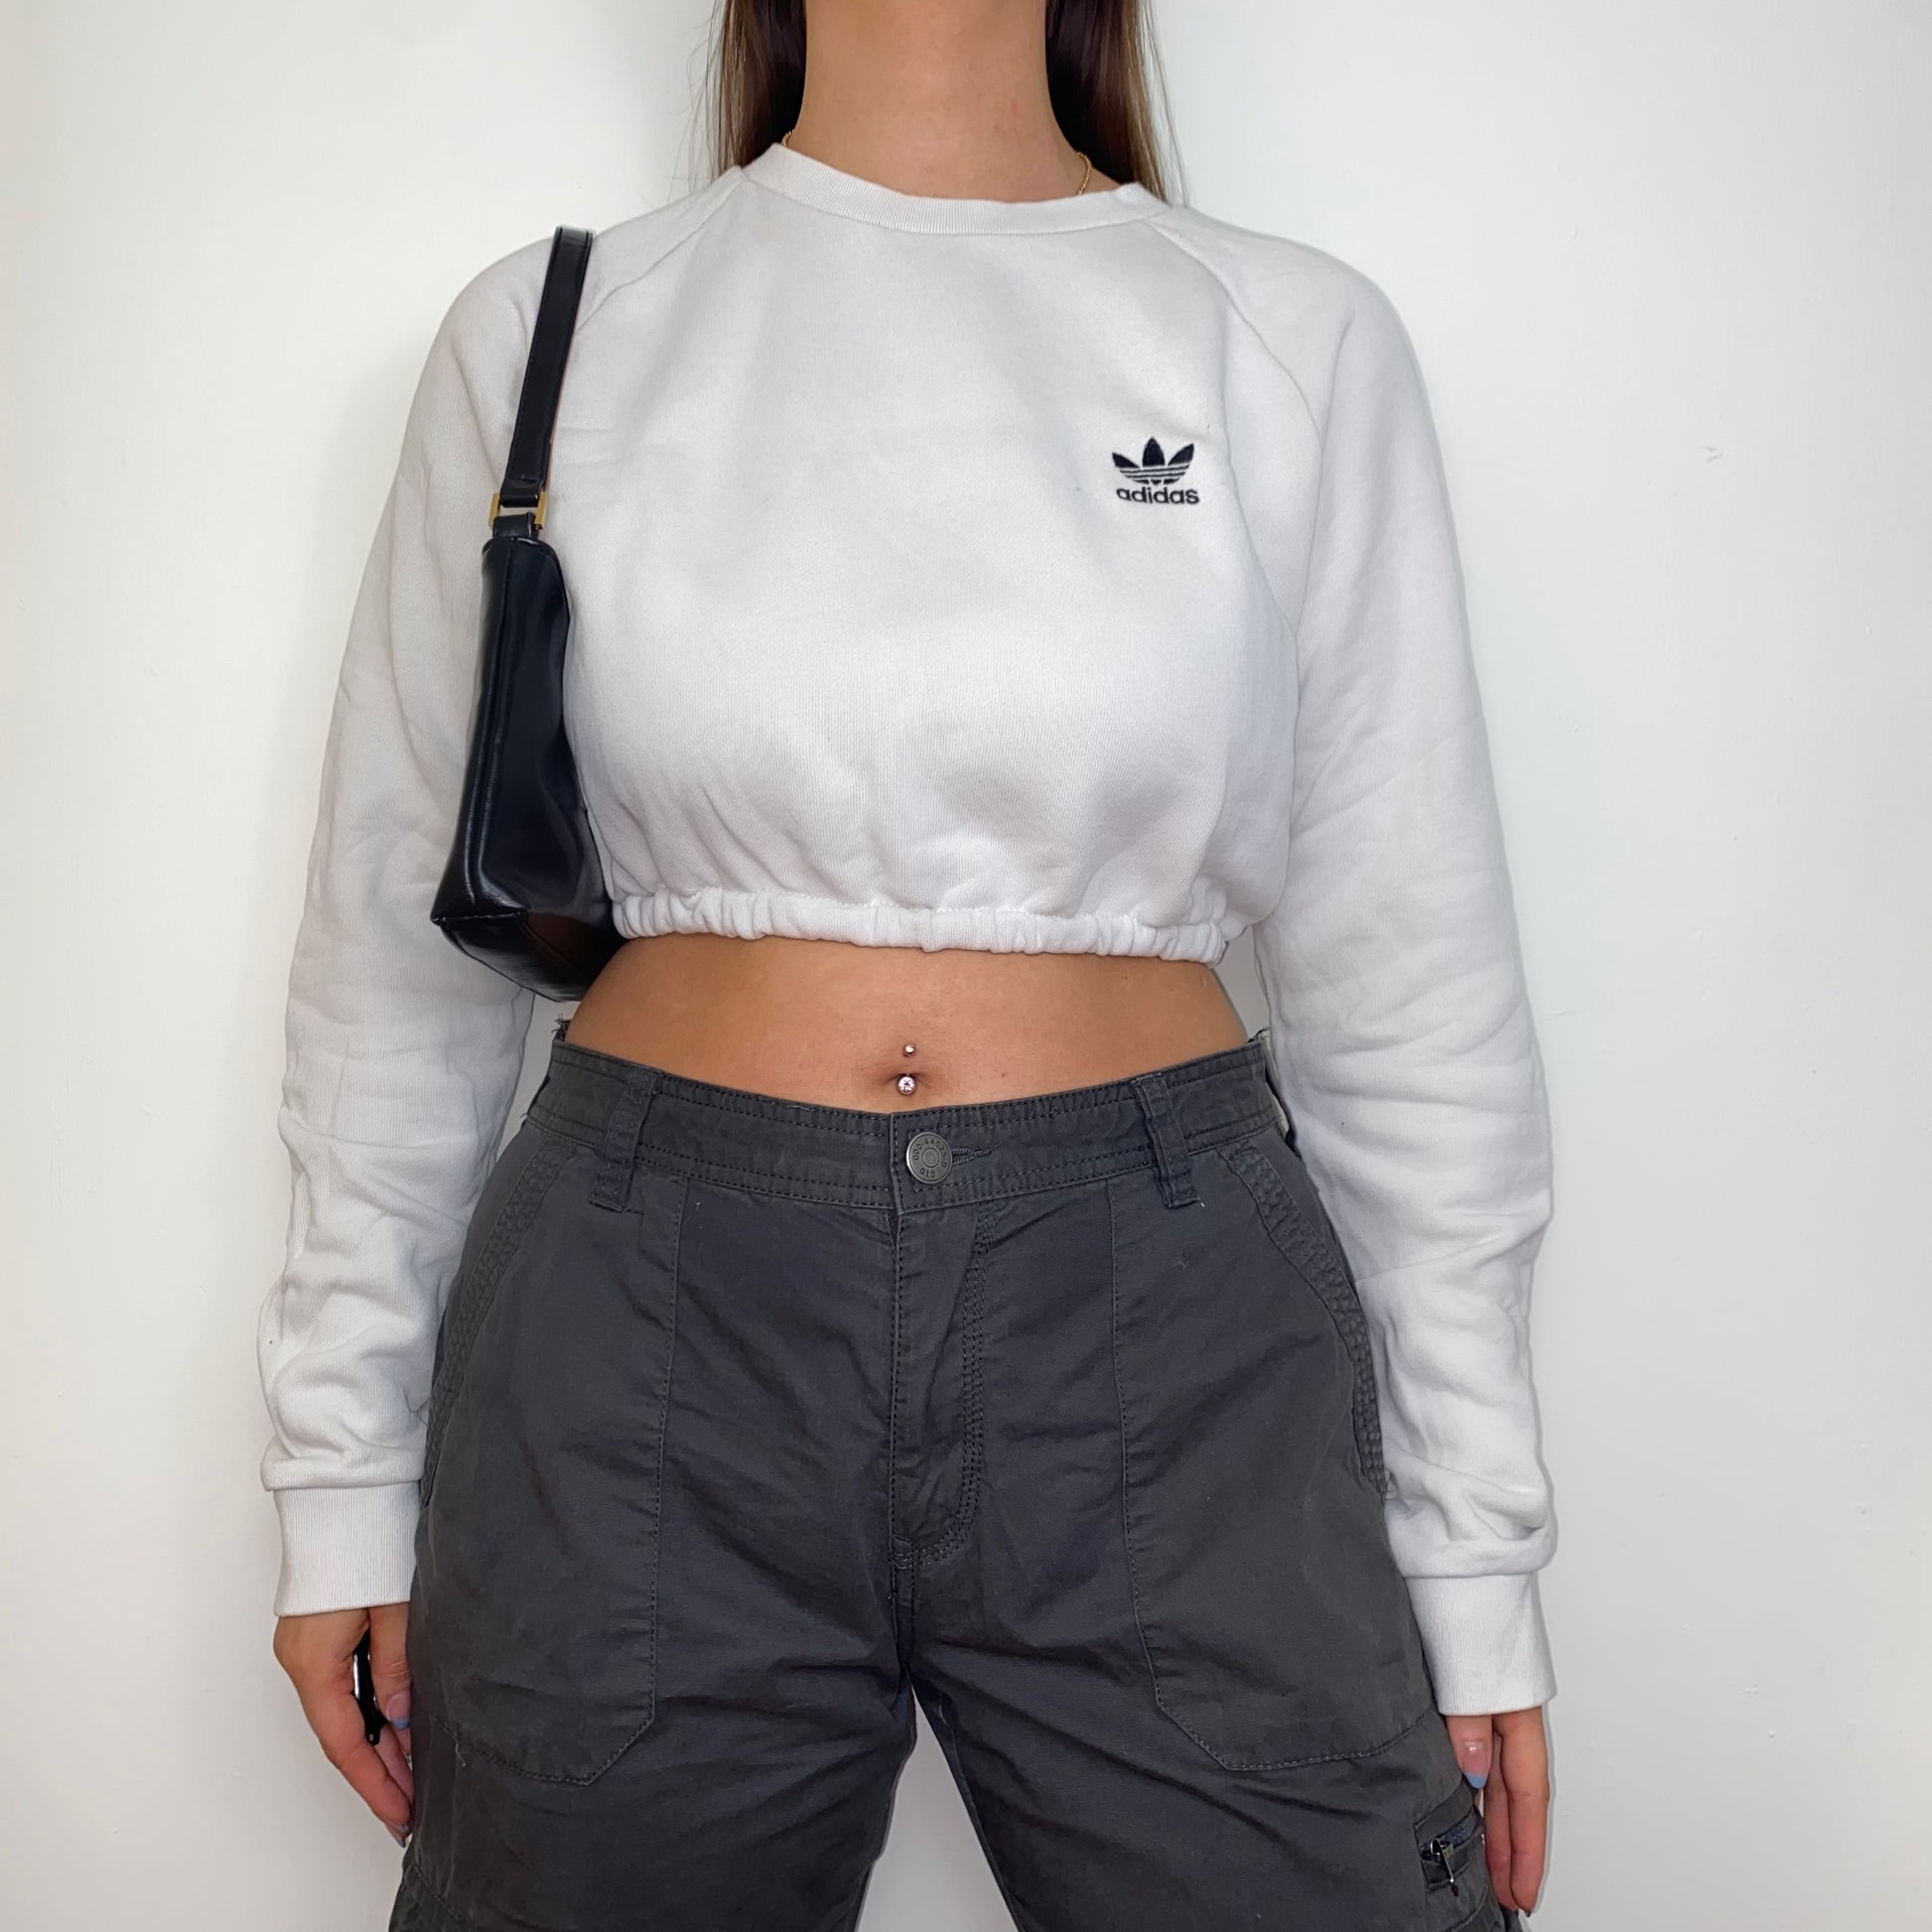 white cropped sweatshirt with black adidas logo shown on a model wearing grey cargo trousers and a black shoulder bag